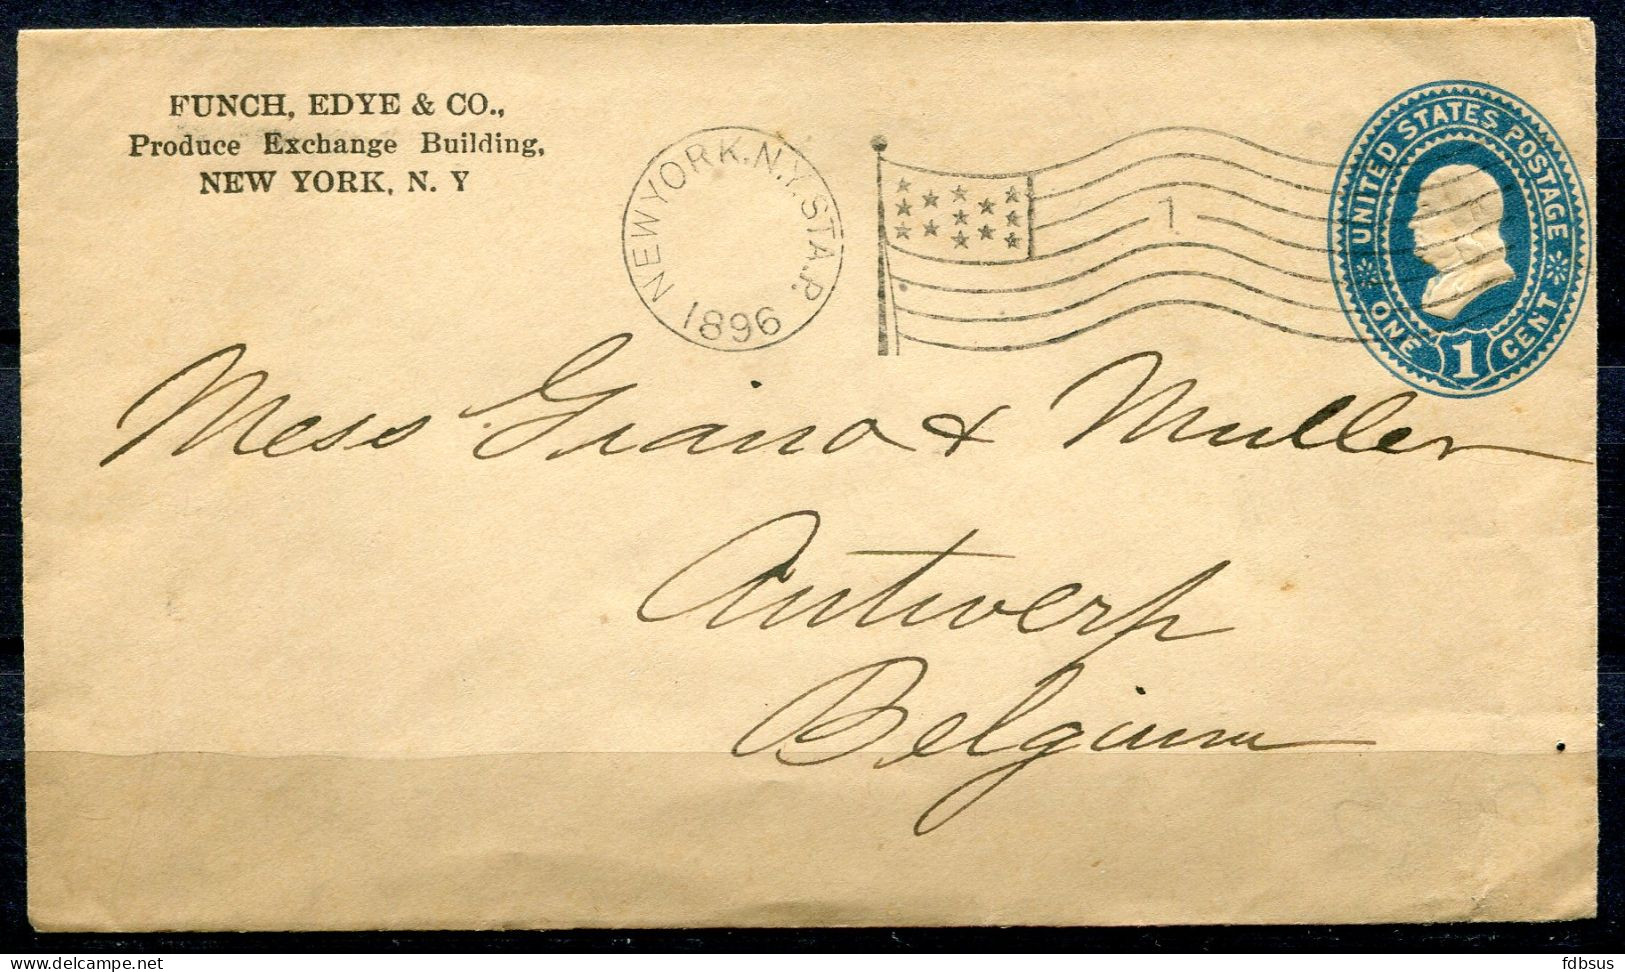 1896 Prepaid Cover 1 Cent From New York Funch Edye & Co. To Antwerp - Nice Flag Cancellation - ...-1900